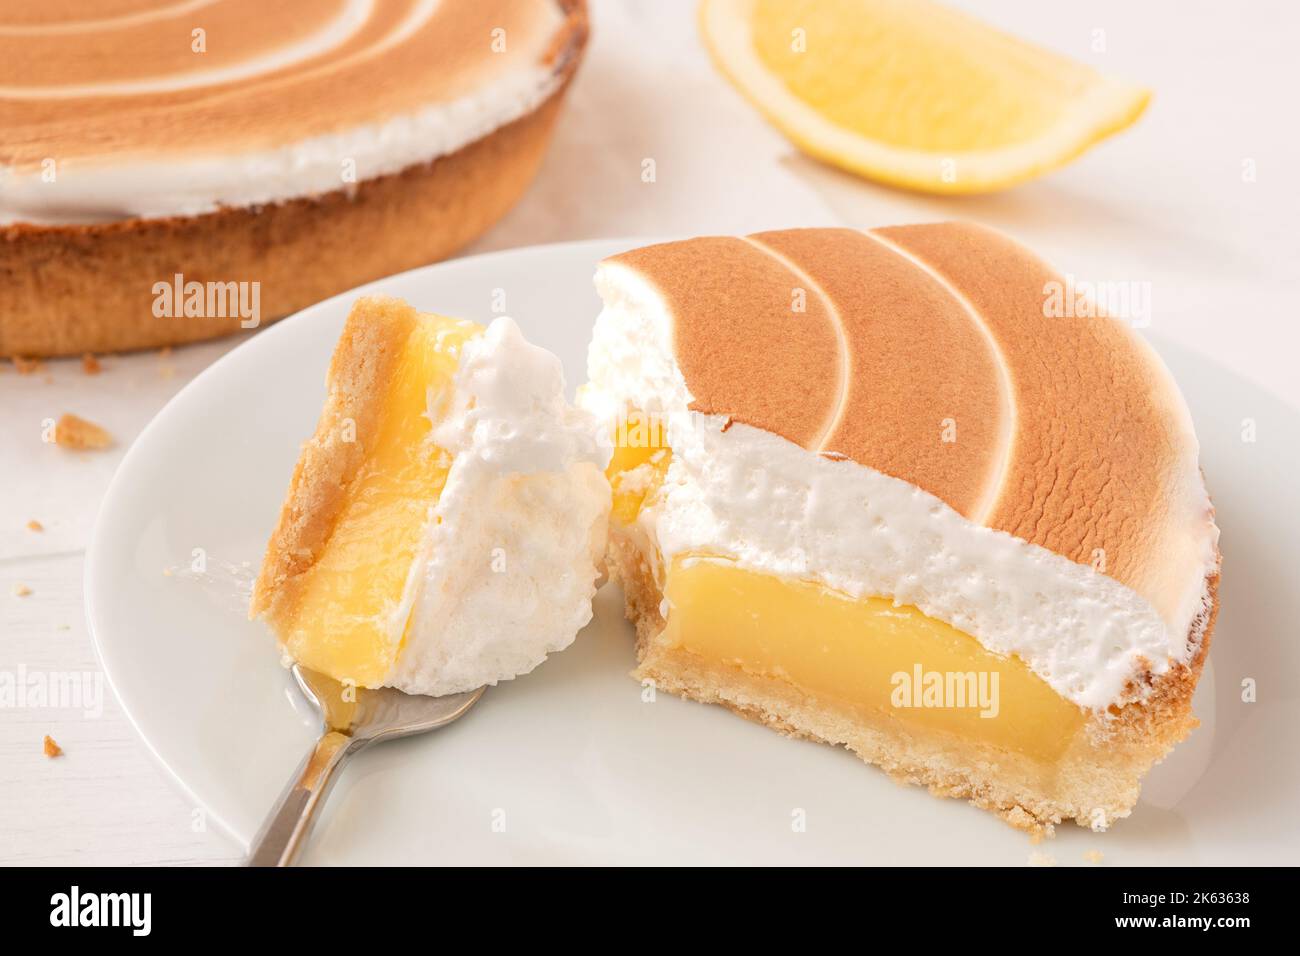 Close up of a portion of lemon tart with meringue topping on white plate with mouthful on a fork. Stock Photo